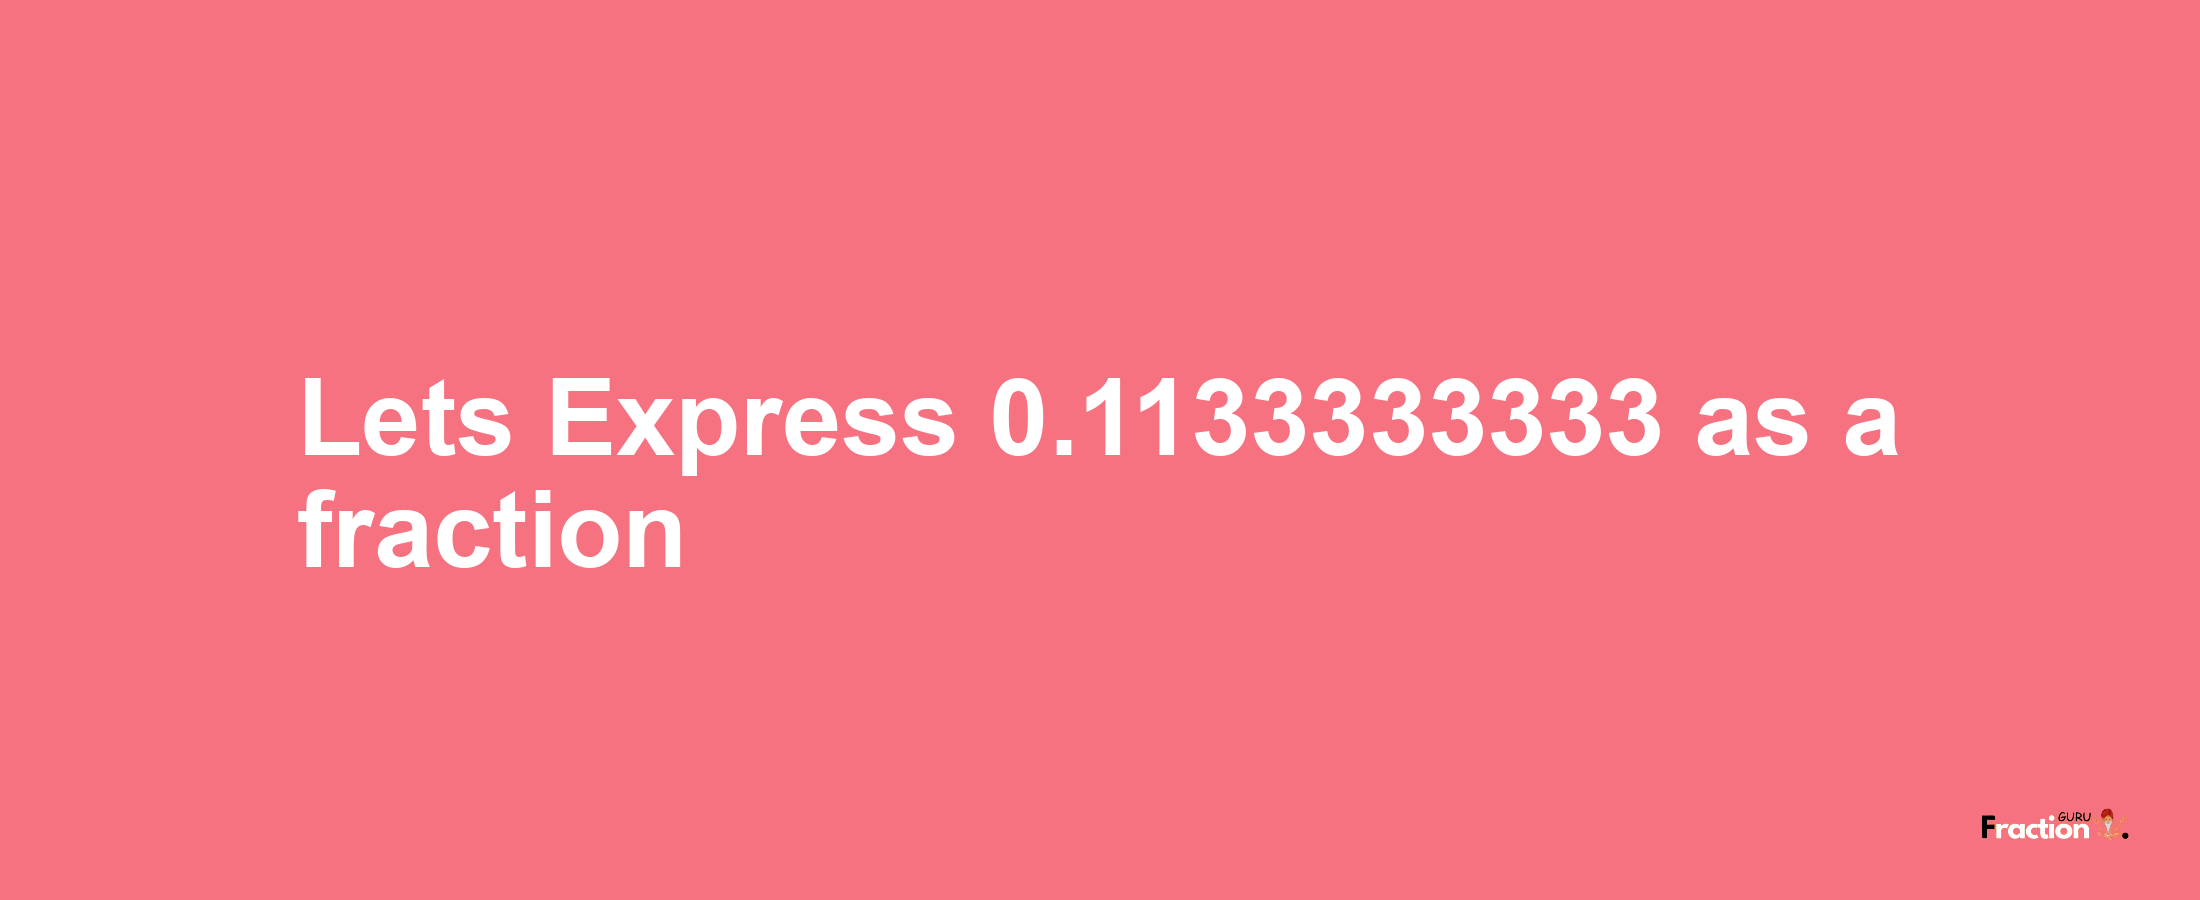 Lets Express 0.1133333333 as afraction